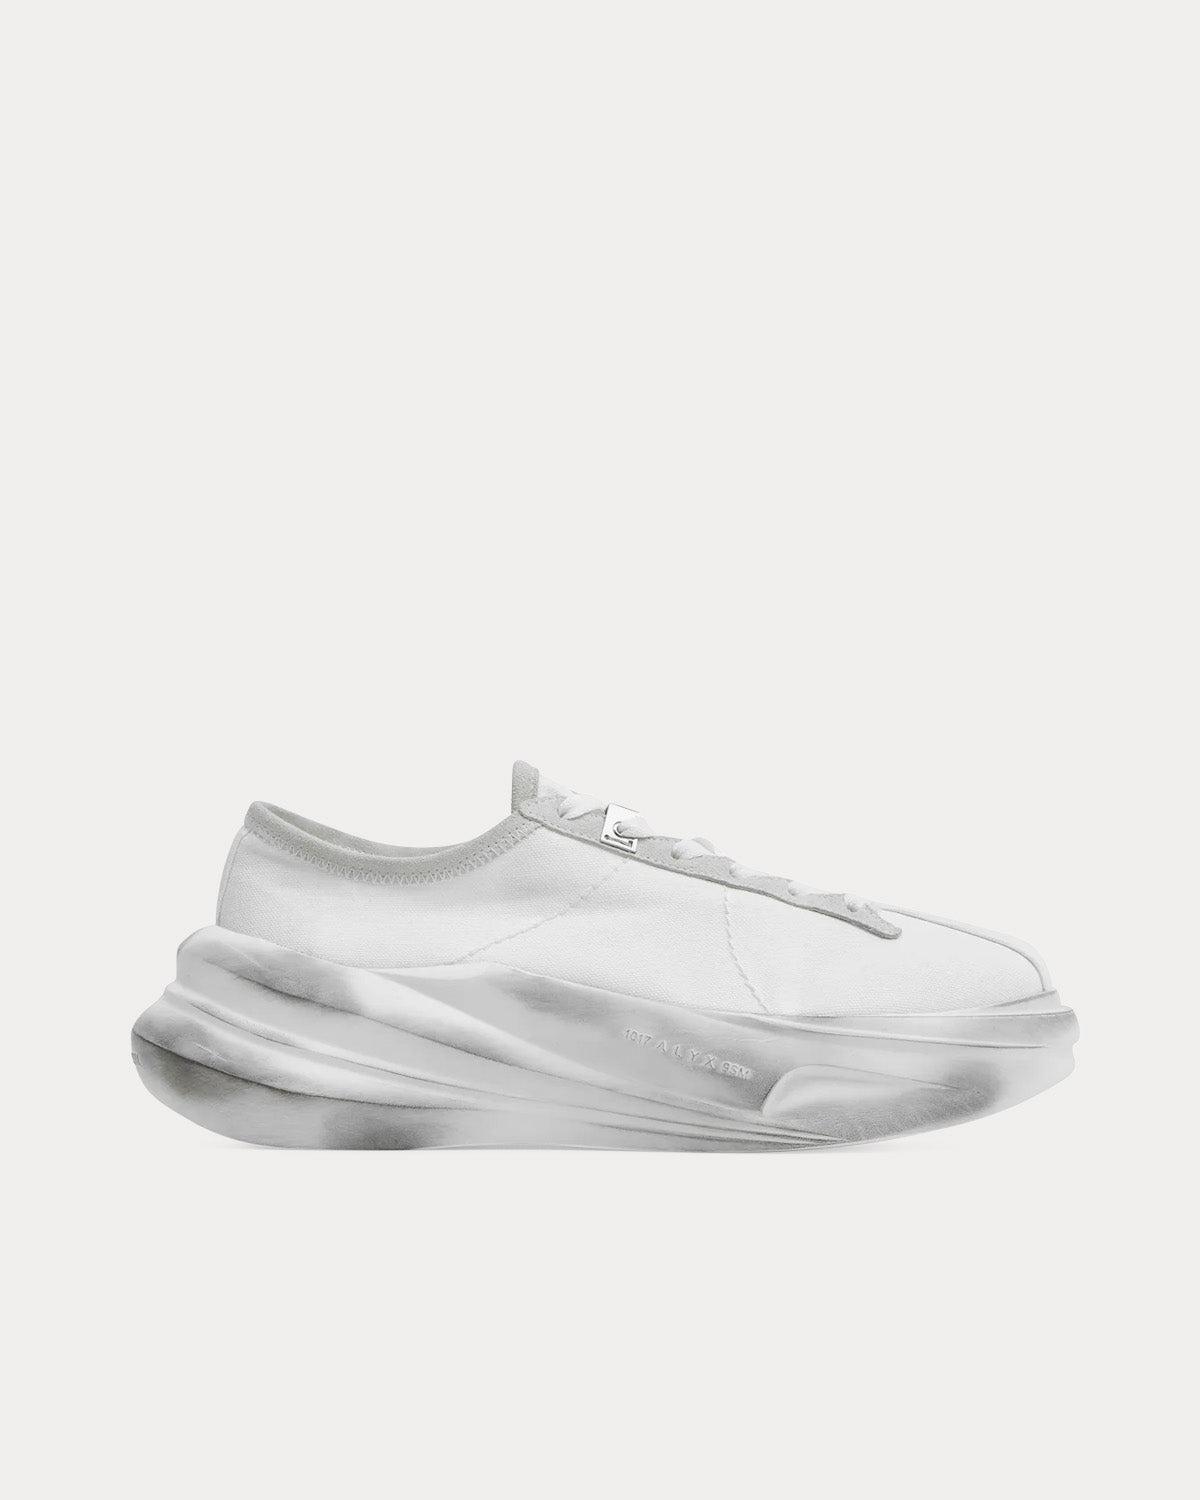 1017 ALYX 9SM Treated Aria White Low Top Sneakers - Sneak in Peace